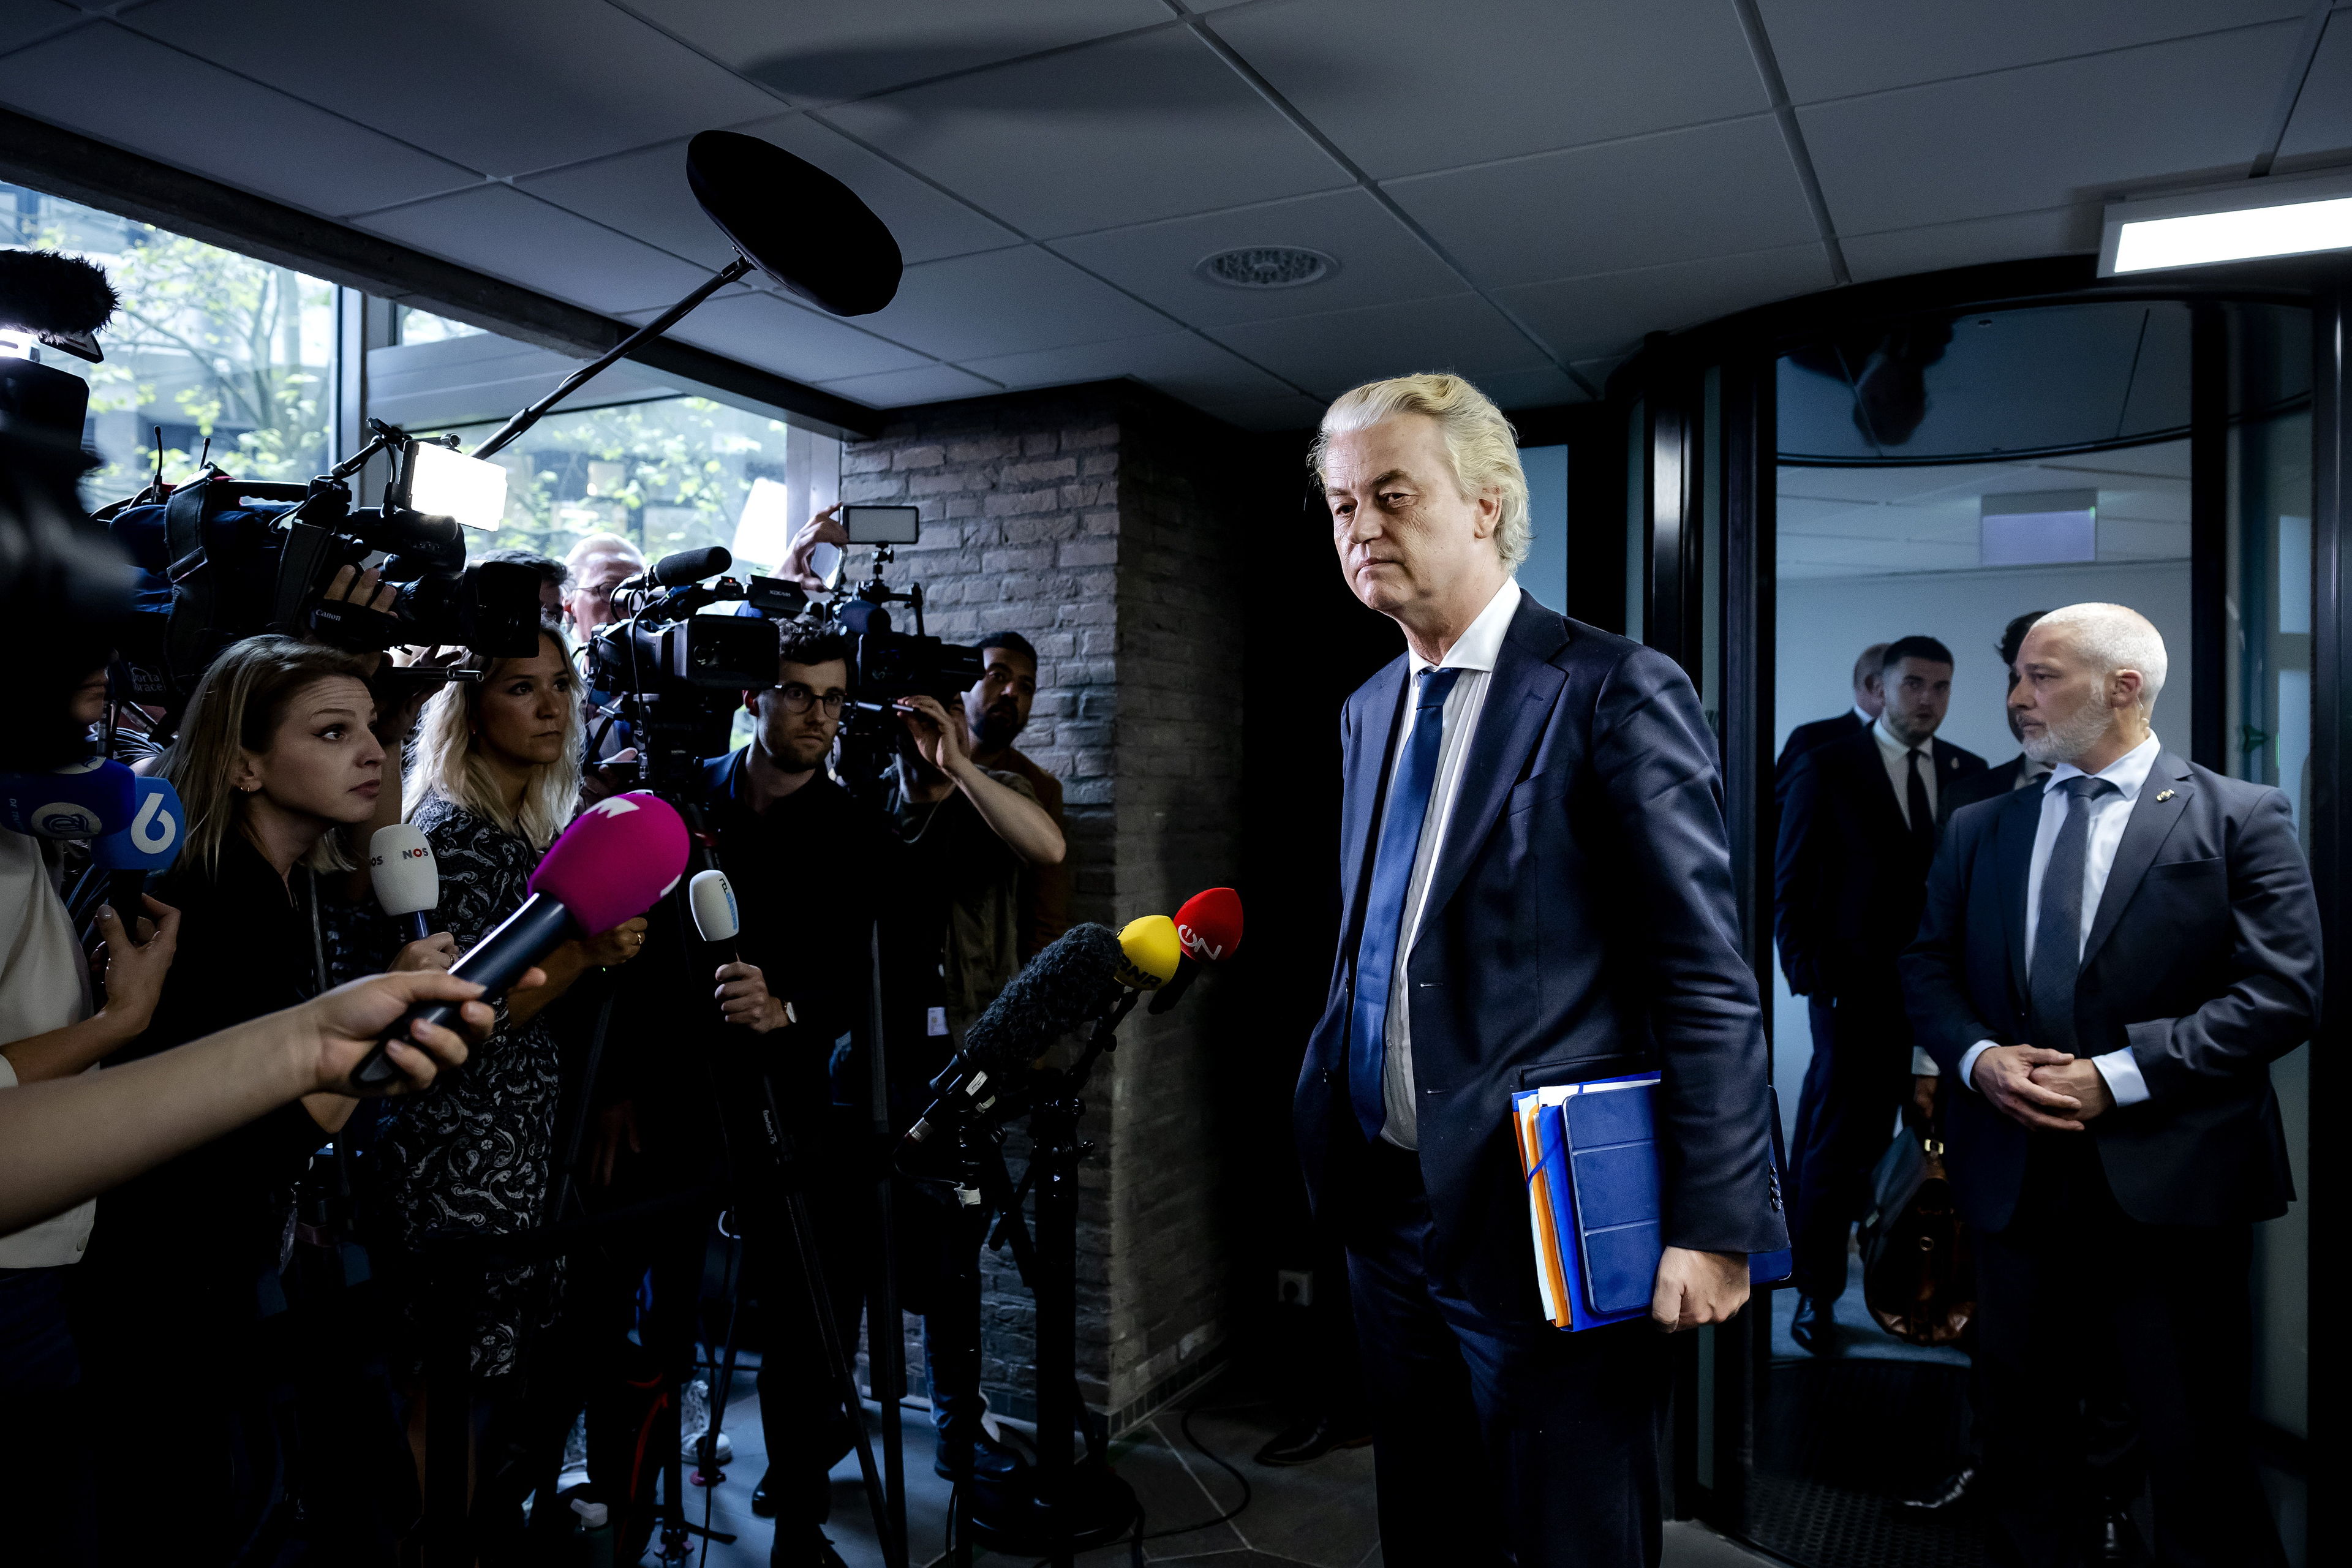 Netherlands to form government with far-right PVV